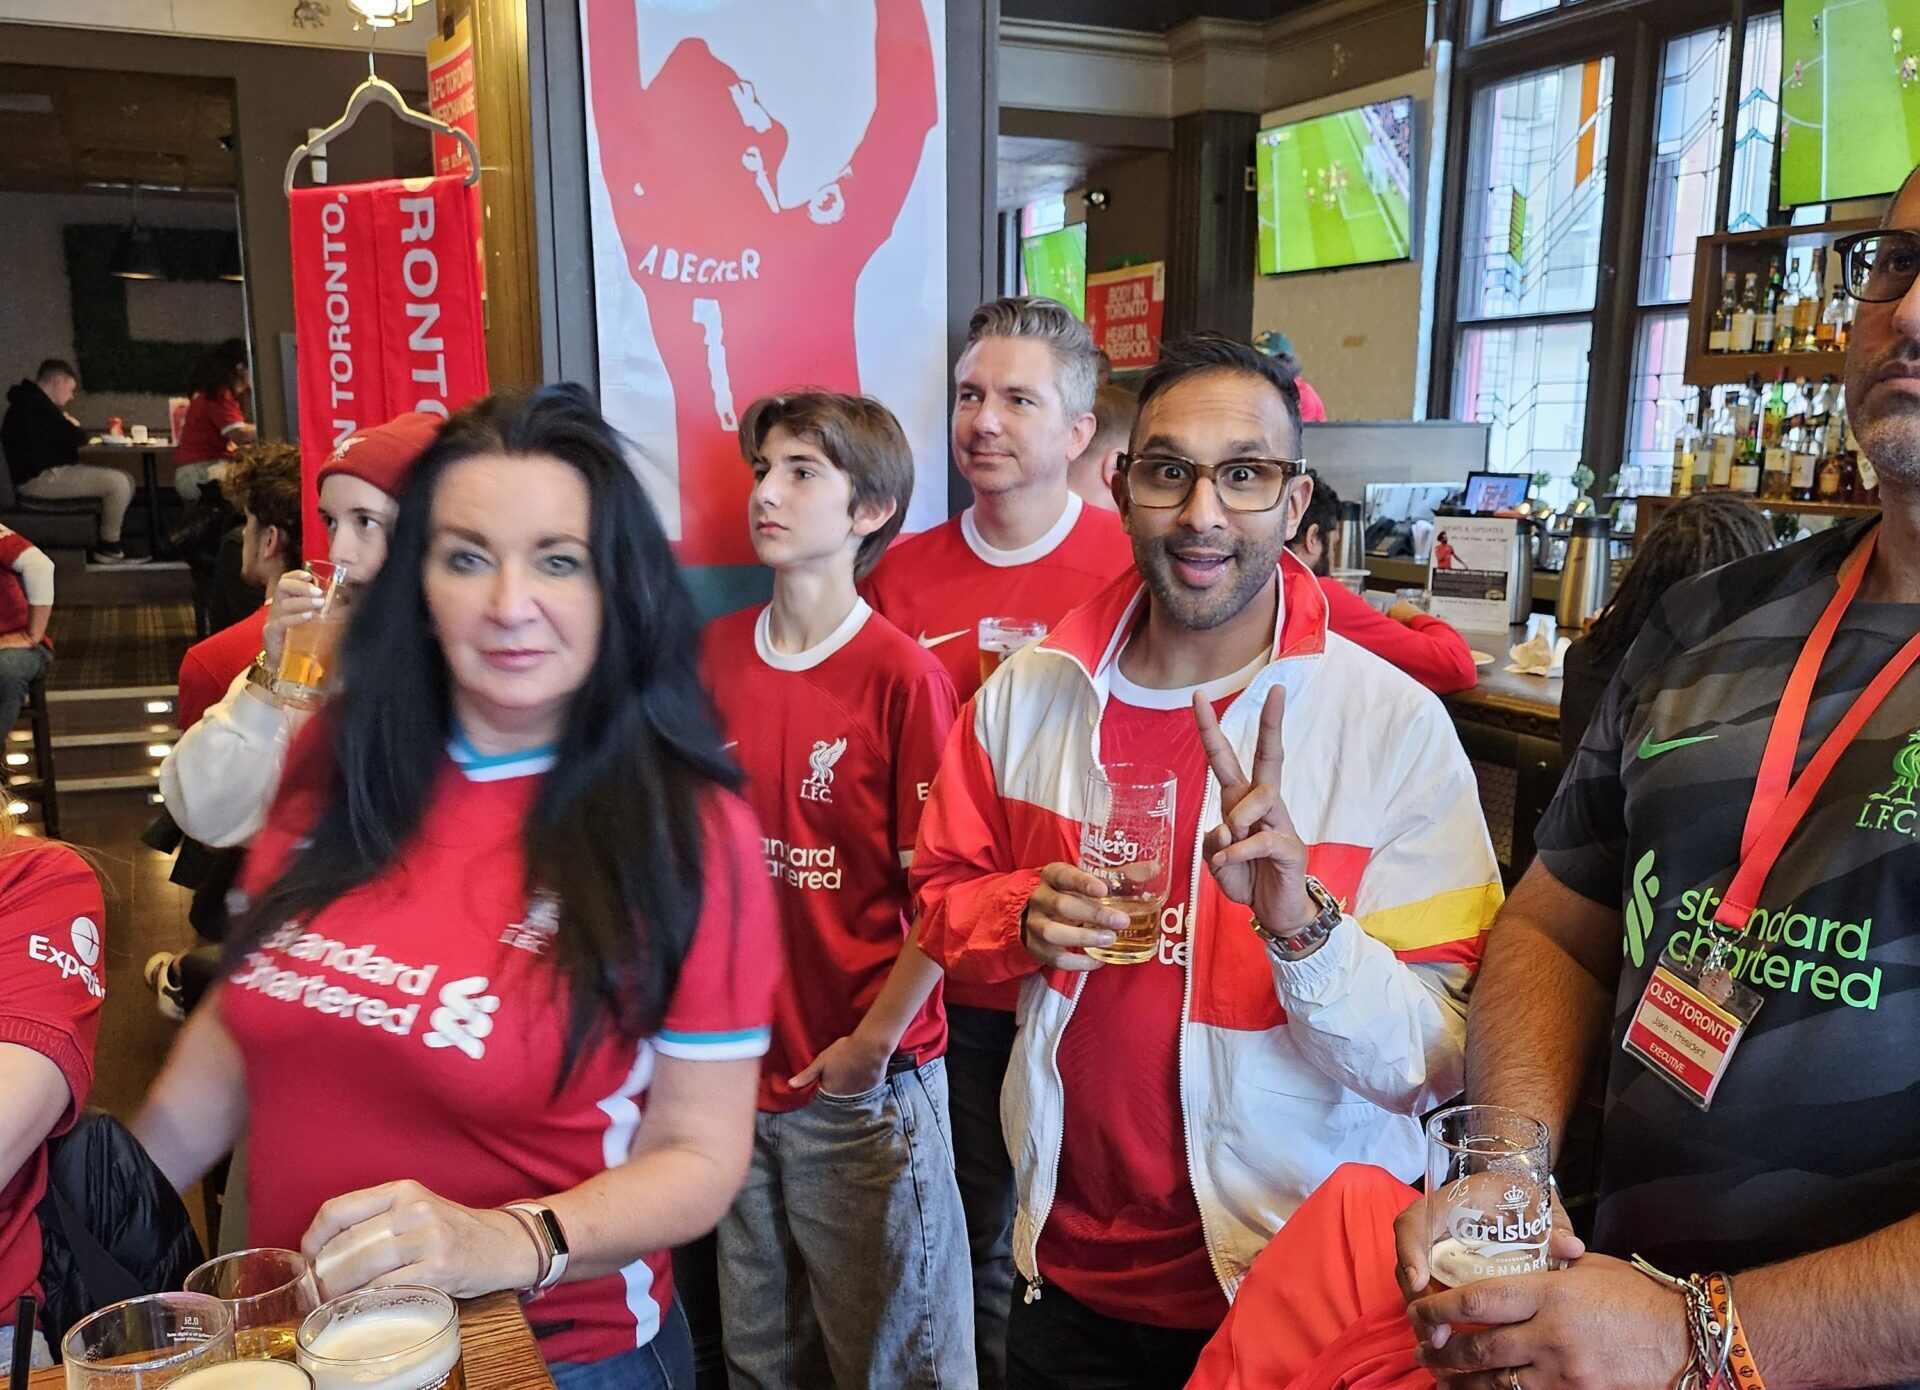 LFC Liverpool FC Fans watching the game at Toronto Pub